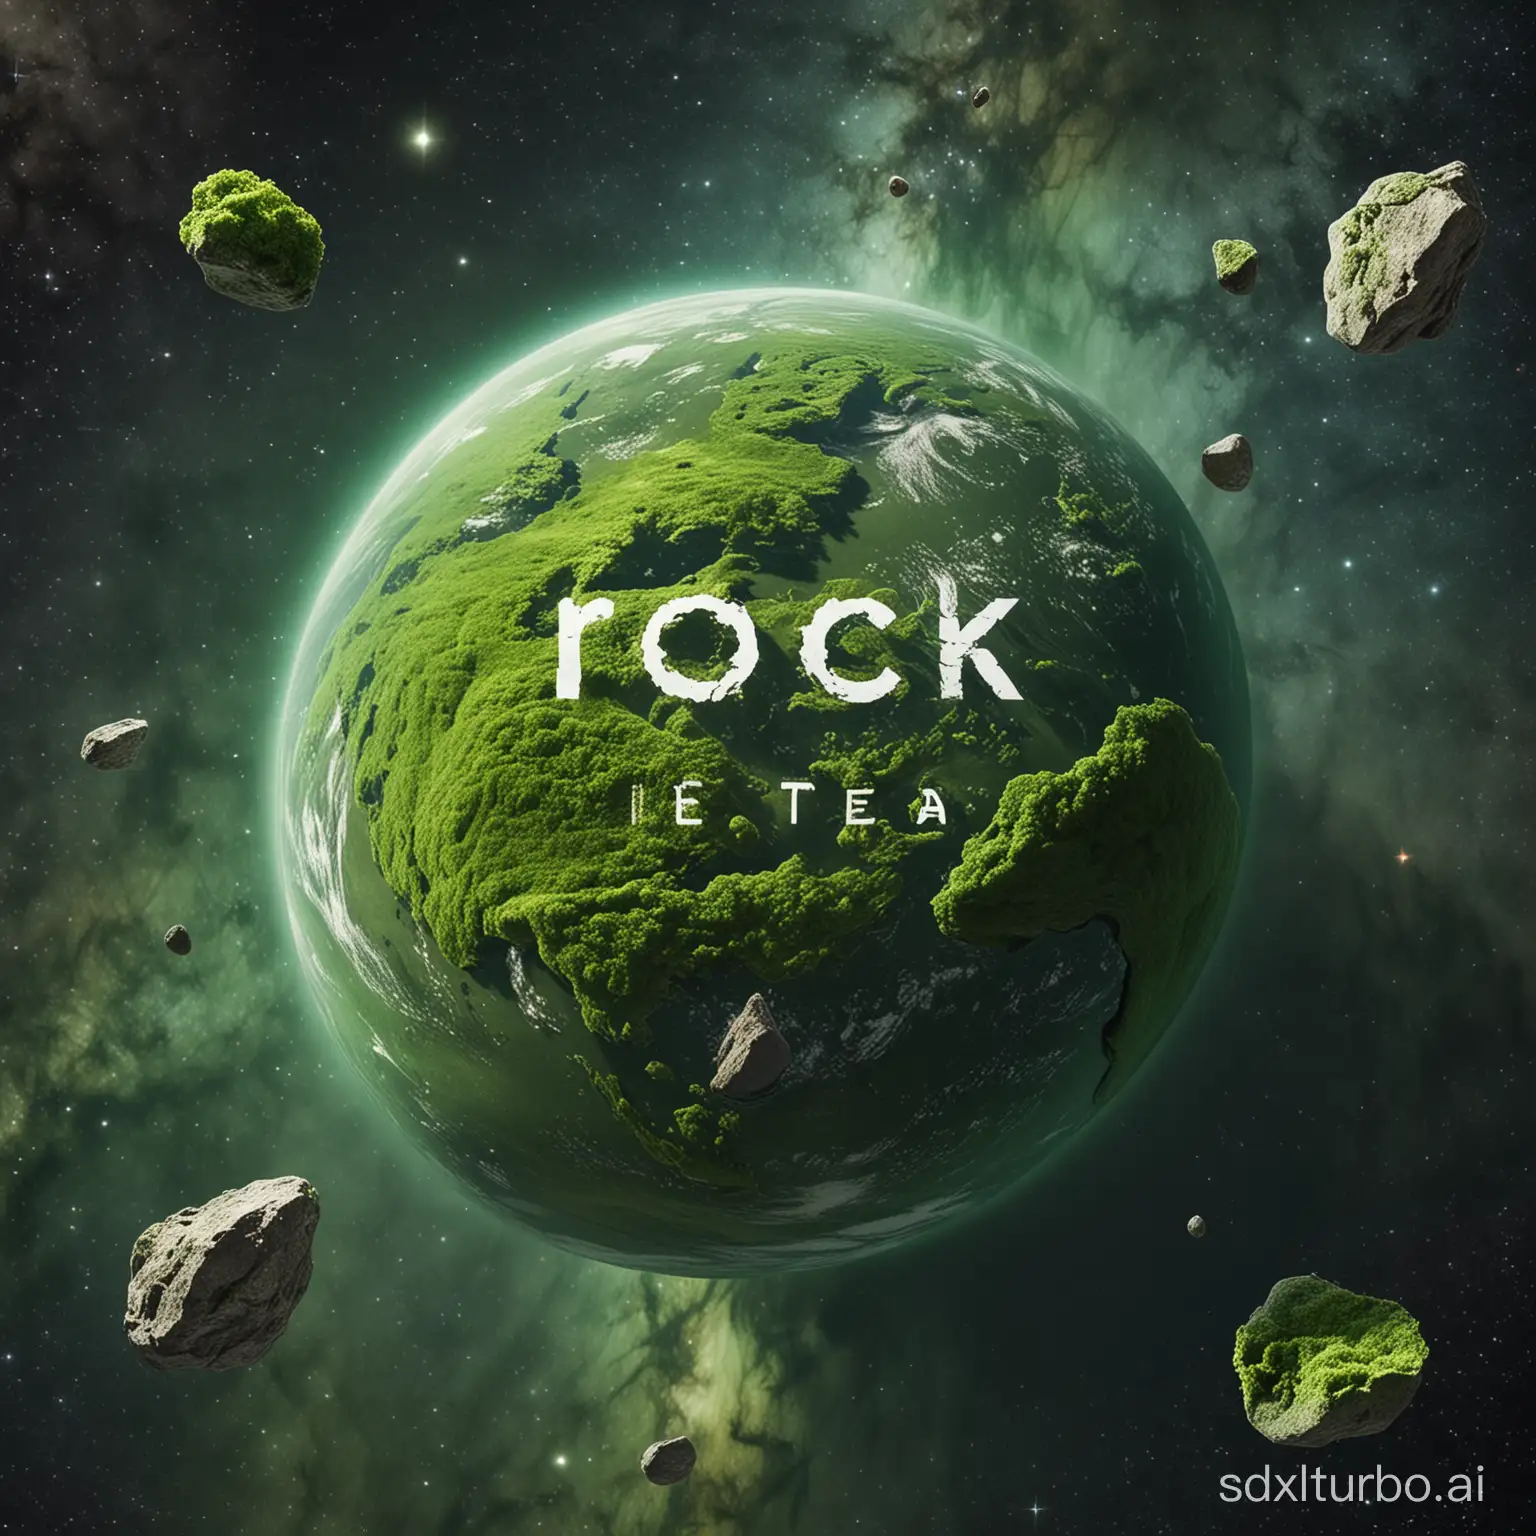 A green planet in the universe with the words 'rock tea' written on it